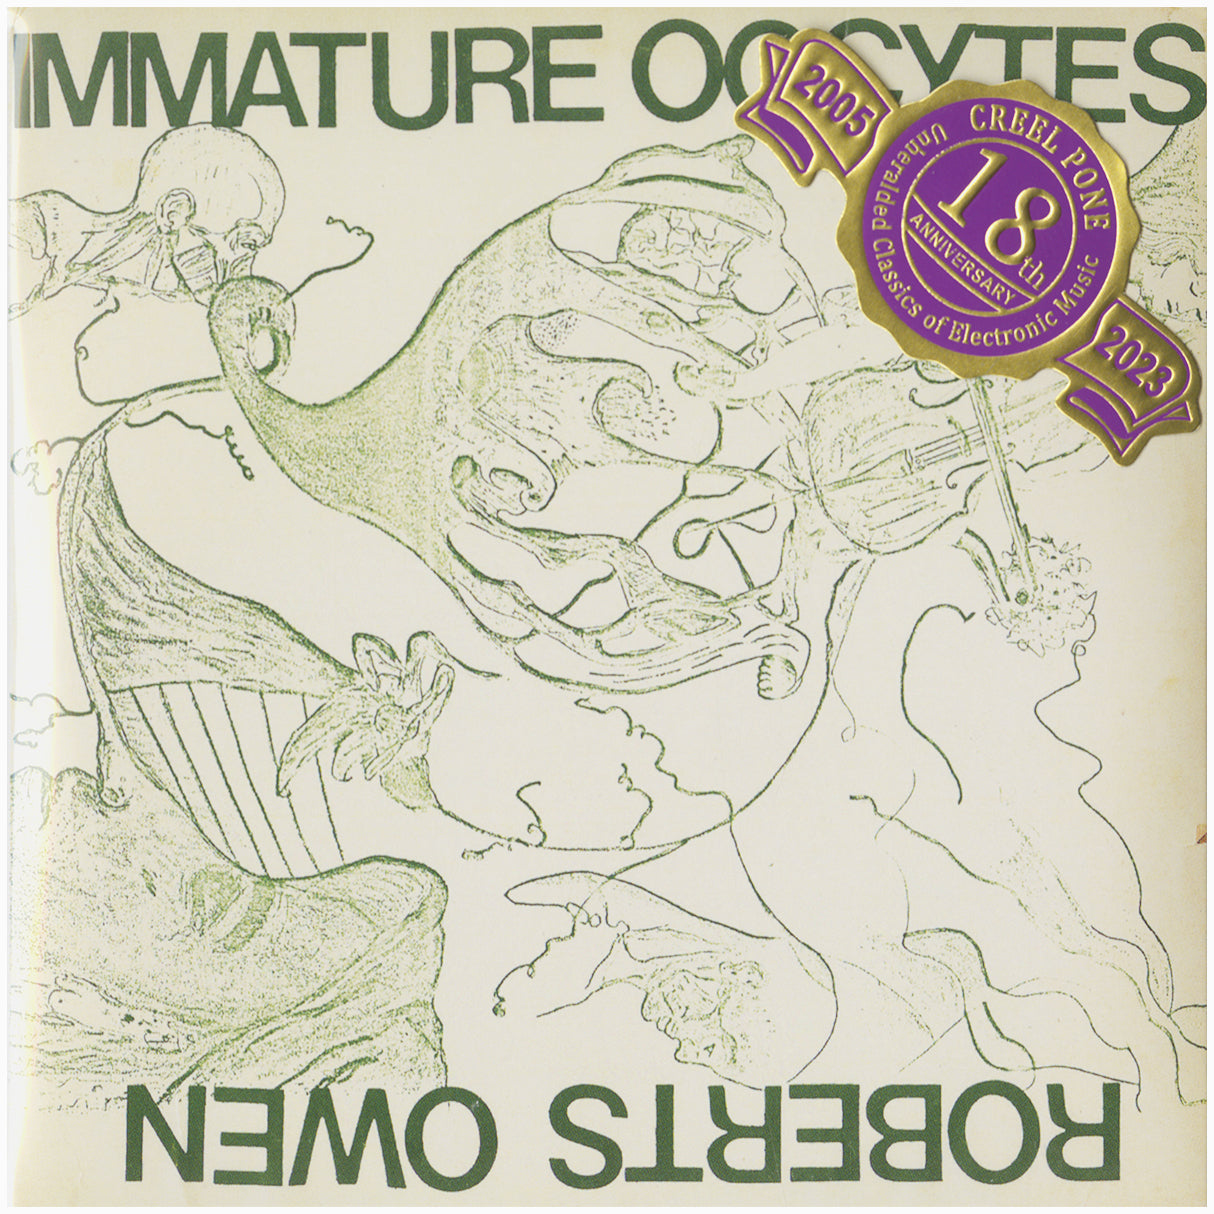 [CP 199.20 CD] Roberts Owen, Steve Tittle; Immature Oocytes, (One Of The) Merely Players